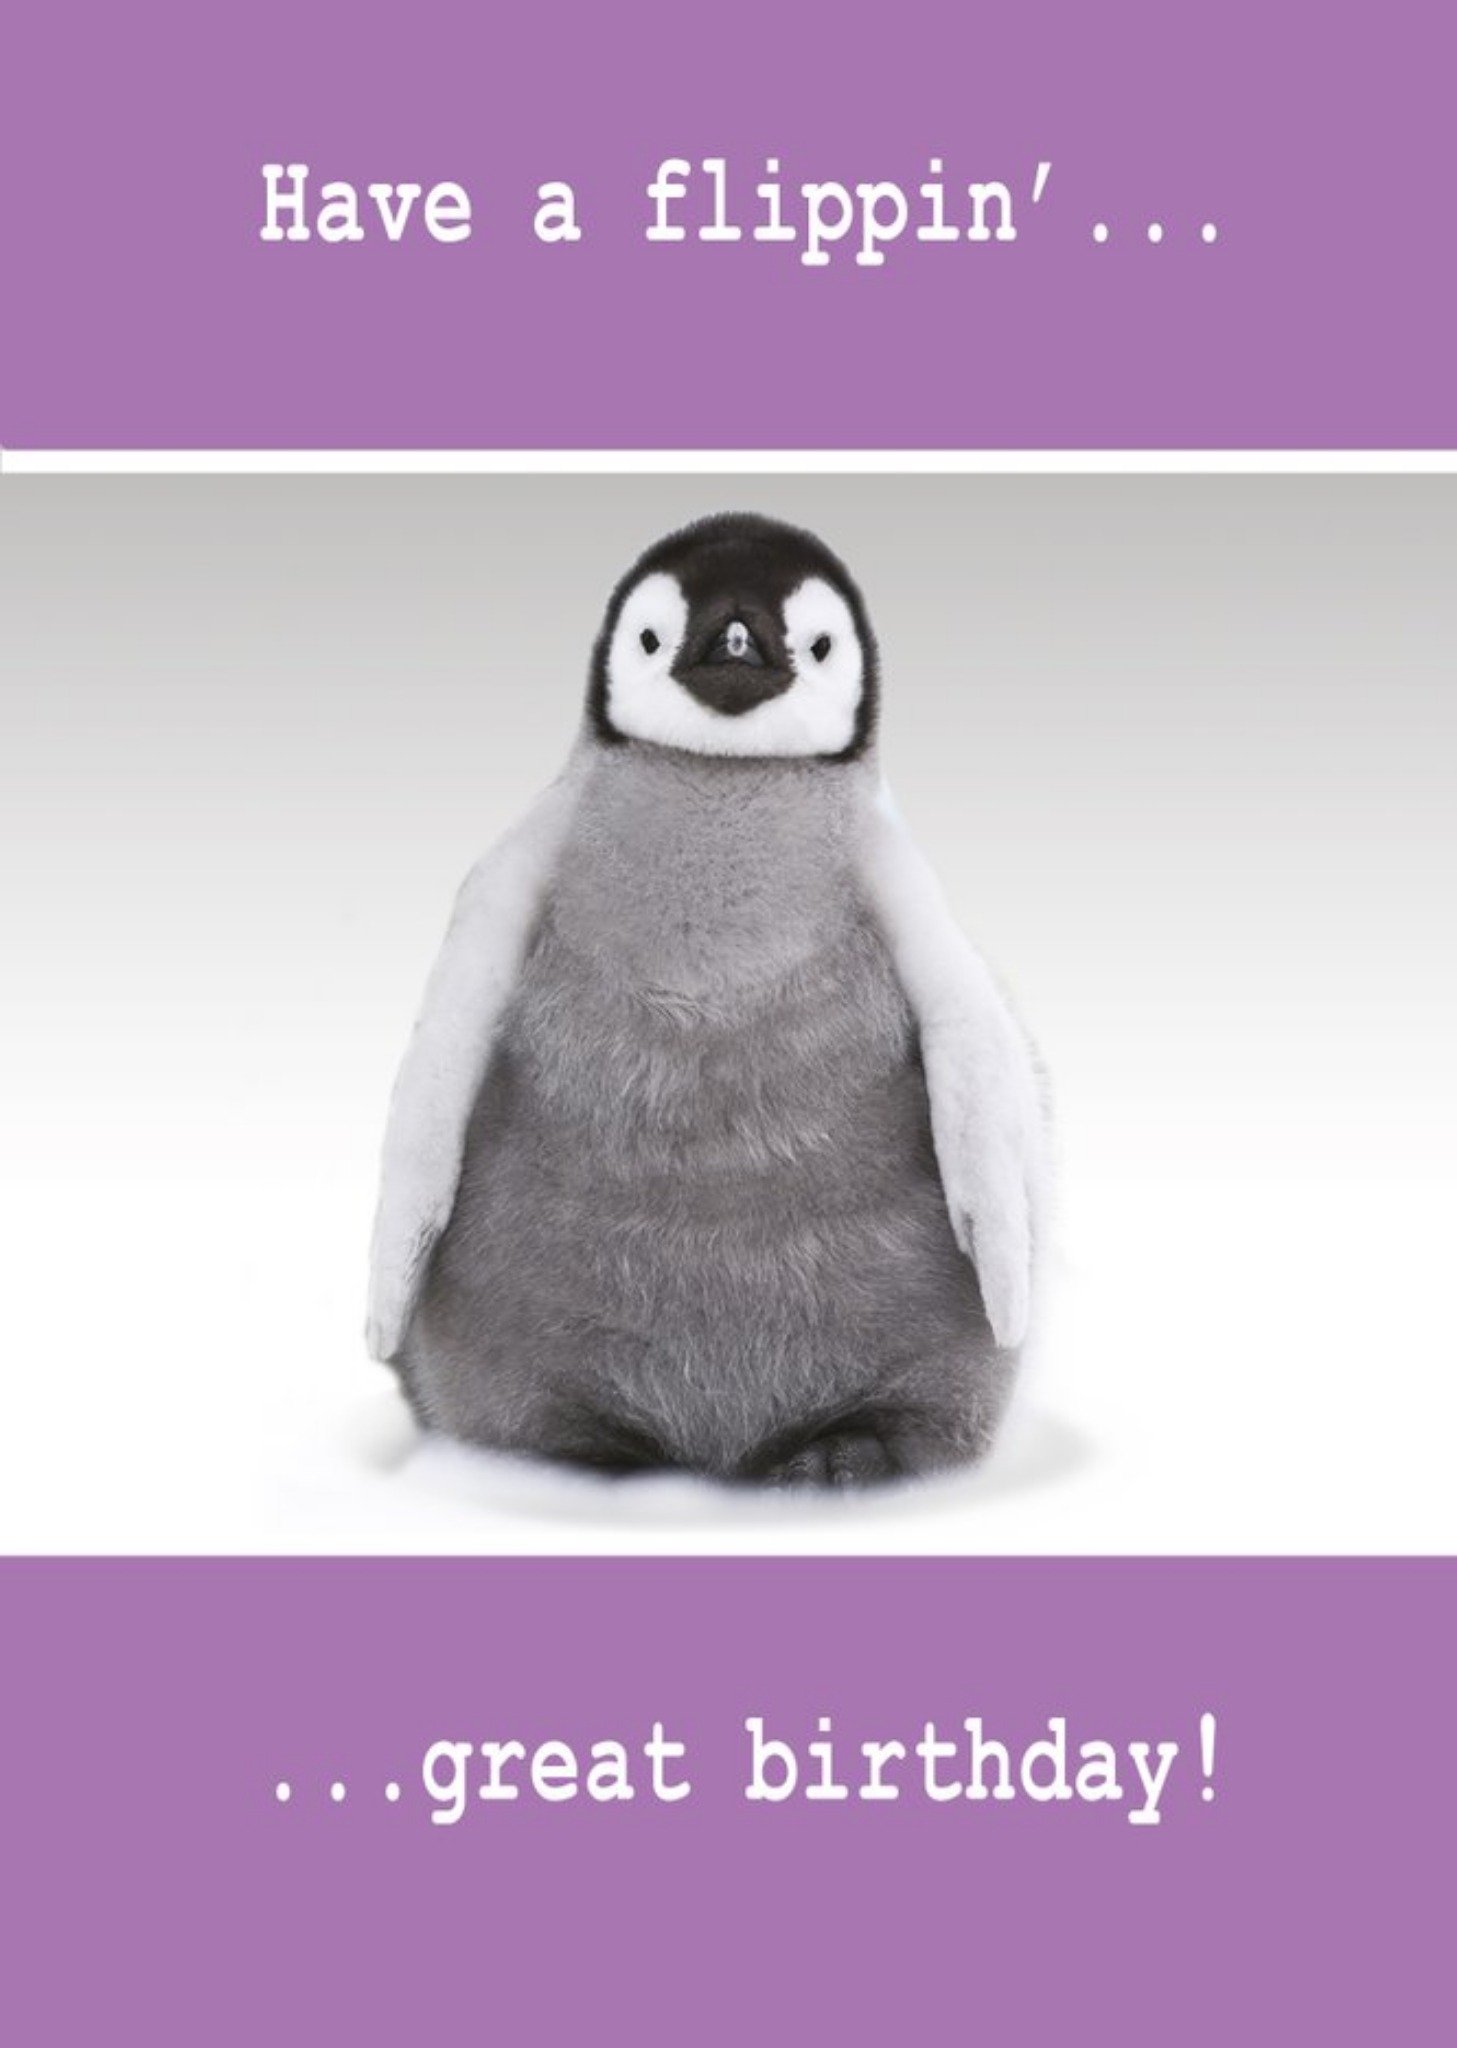 Moonpig Quitting Hollywood Paw Play Penguin Birthday Funny Card Ecard